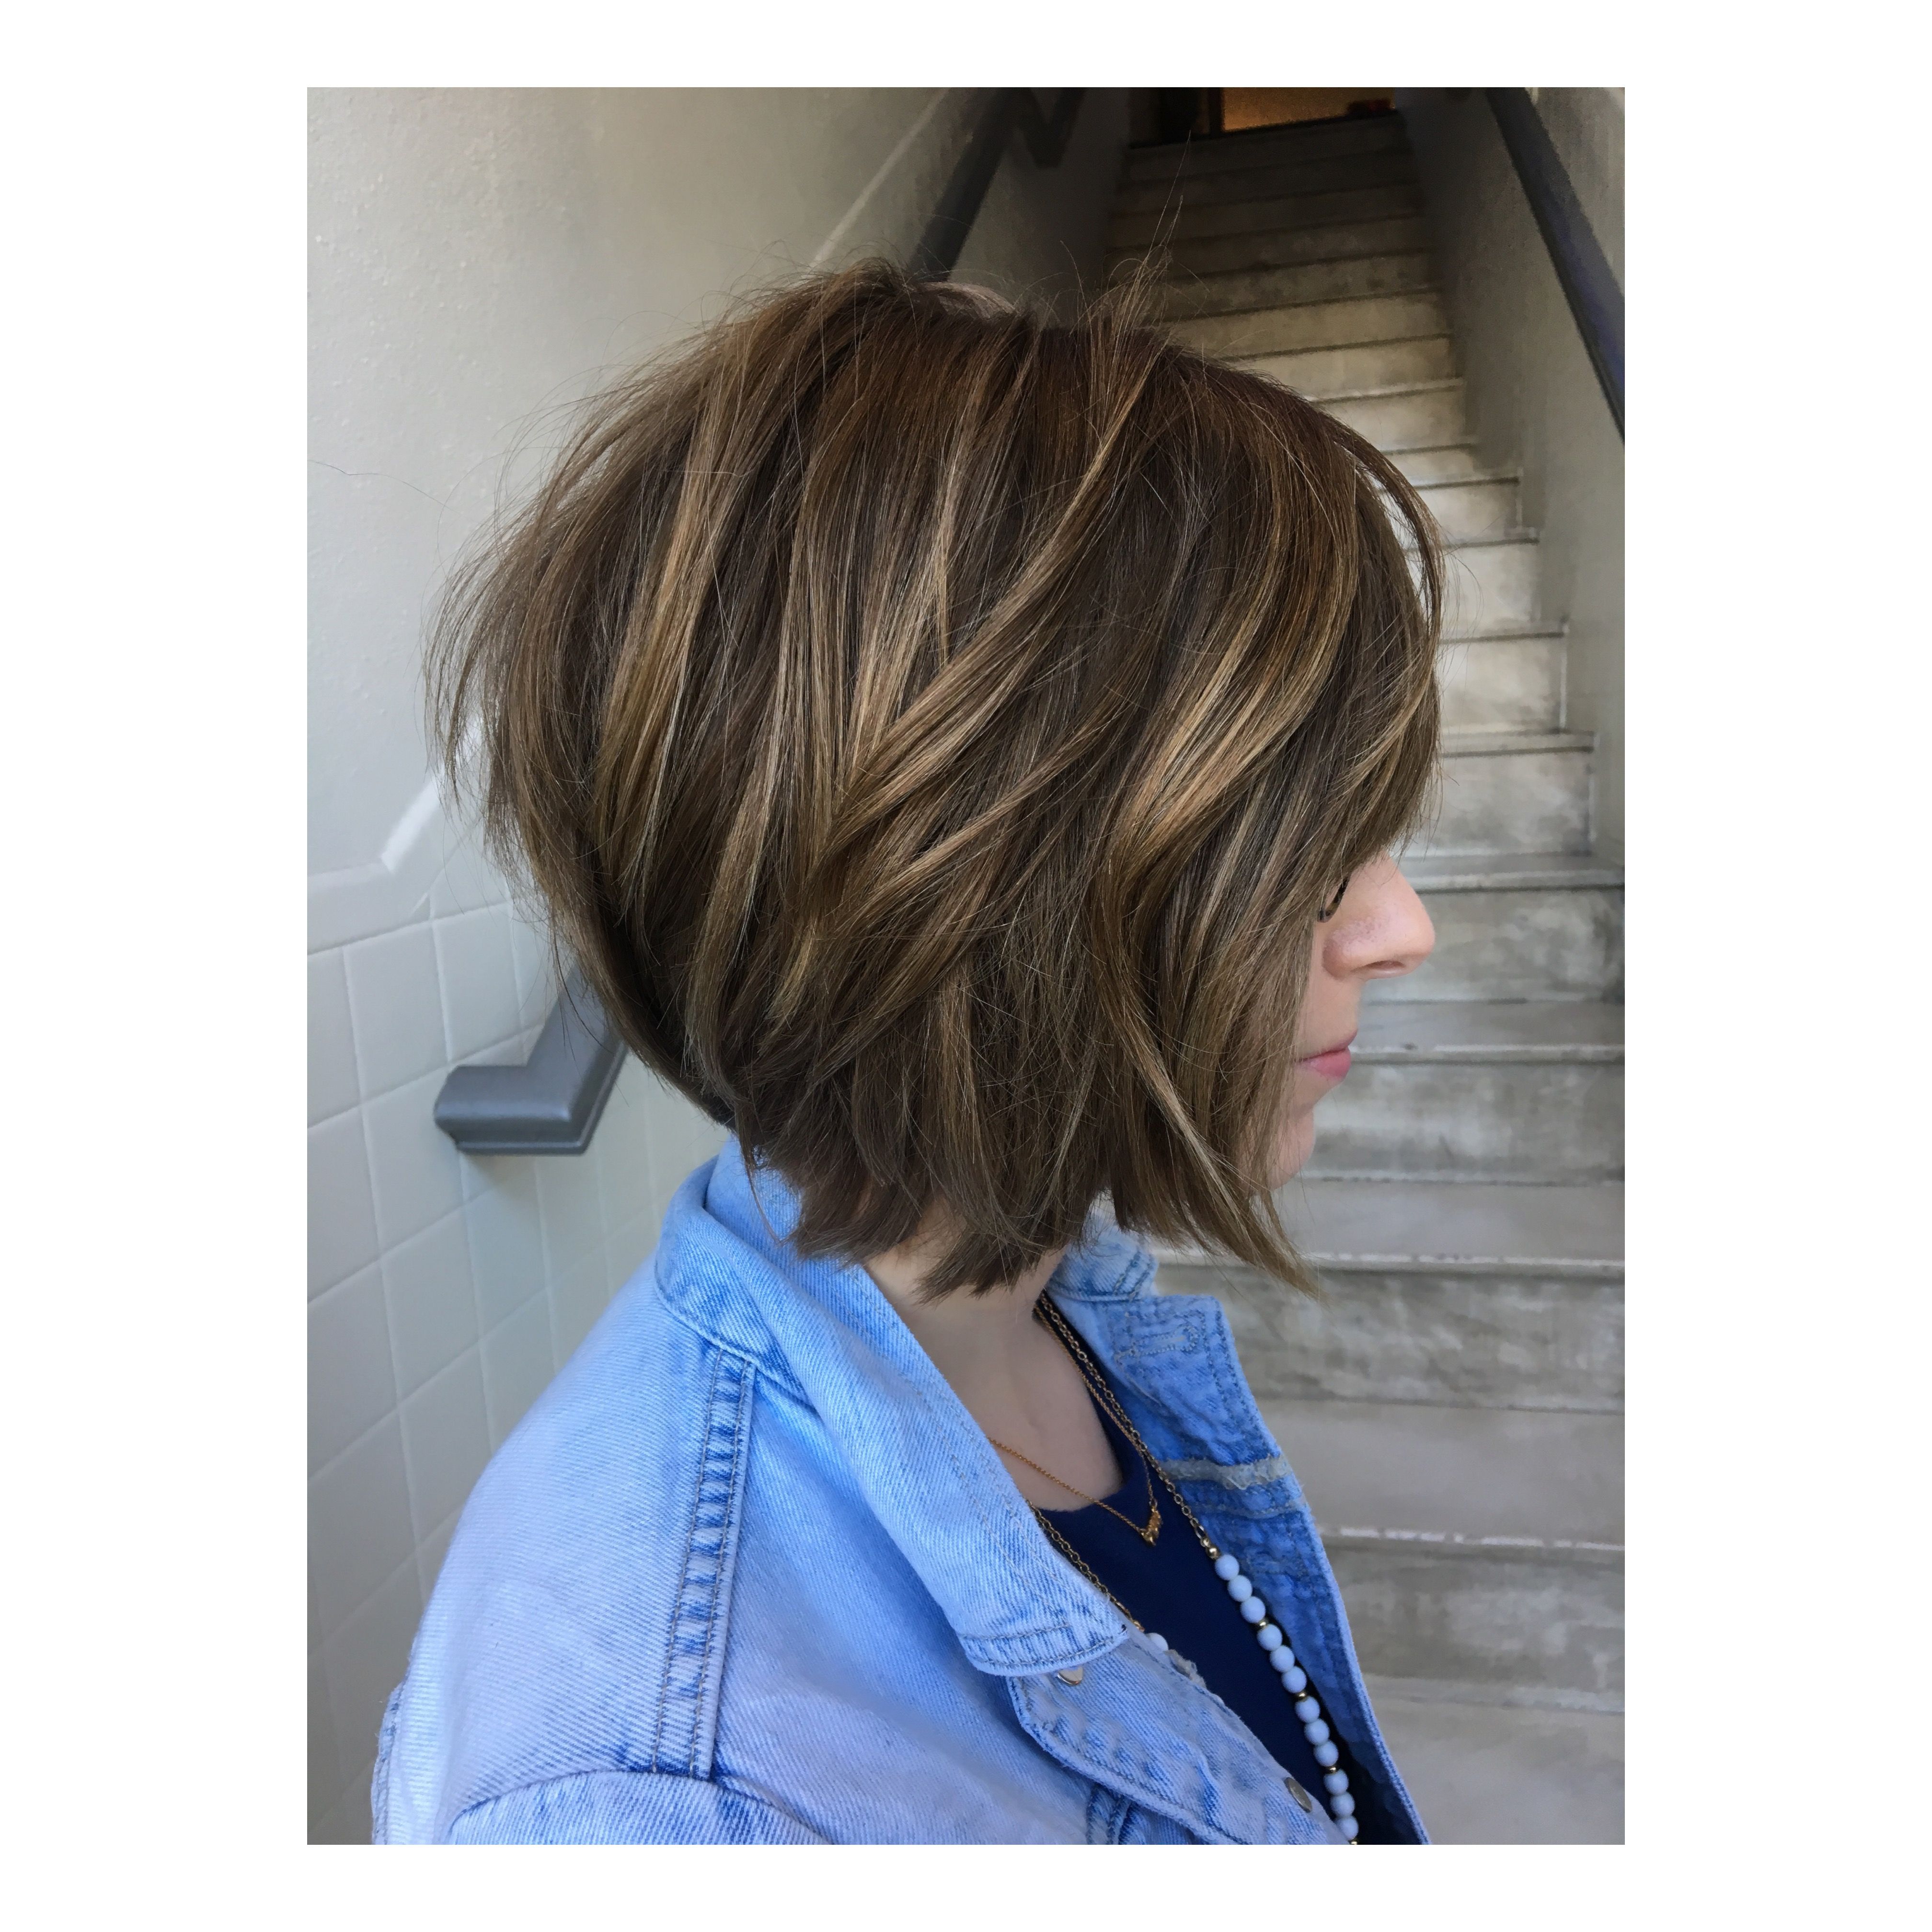 Amusing Textured Bob Hairstyle On Short Hair Texture Bob Textured For Stacked Copper Balayage Bob Hairstyles (View 16 of 20)